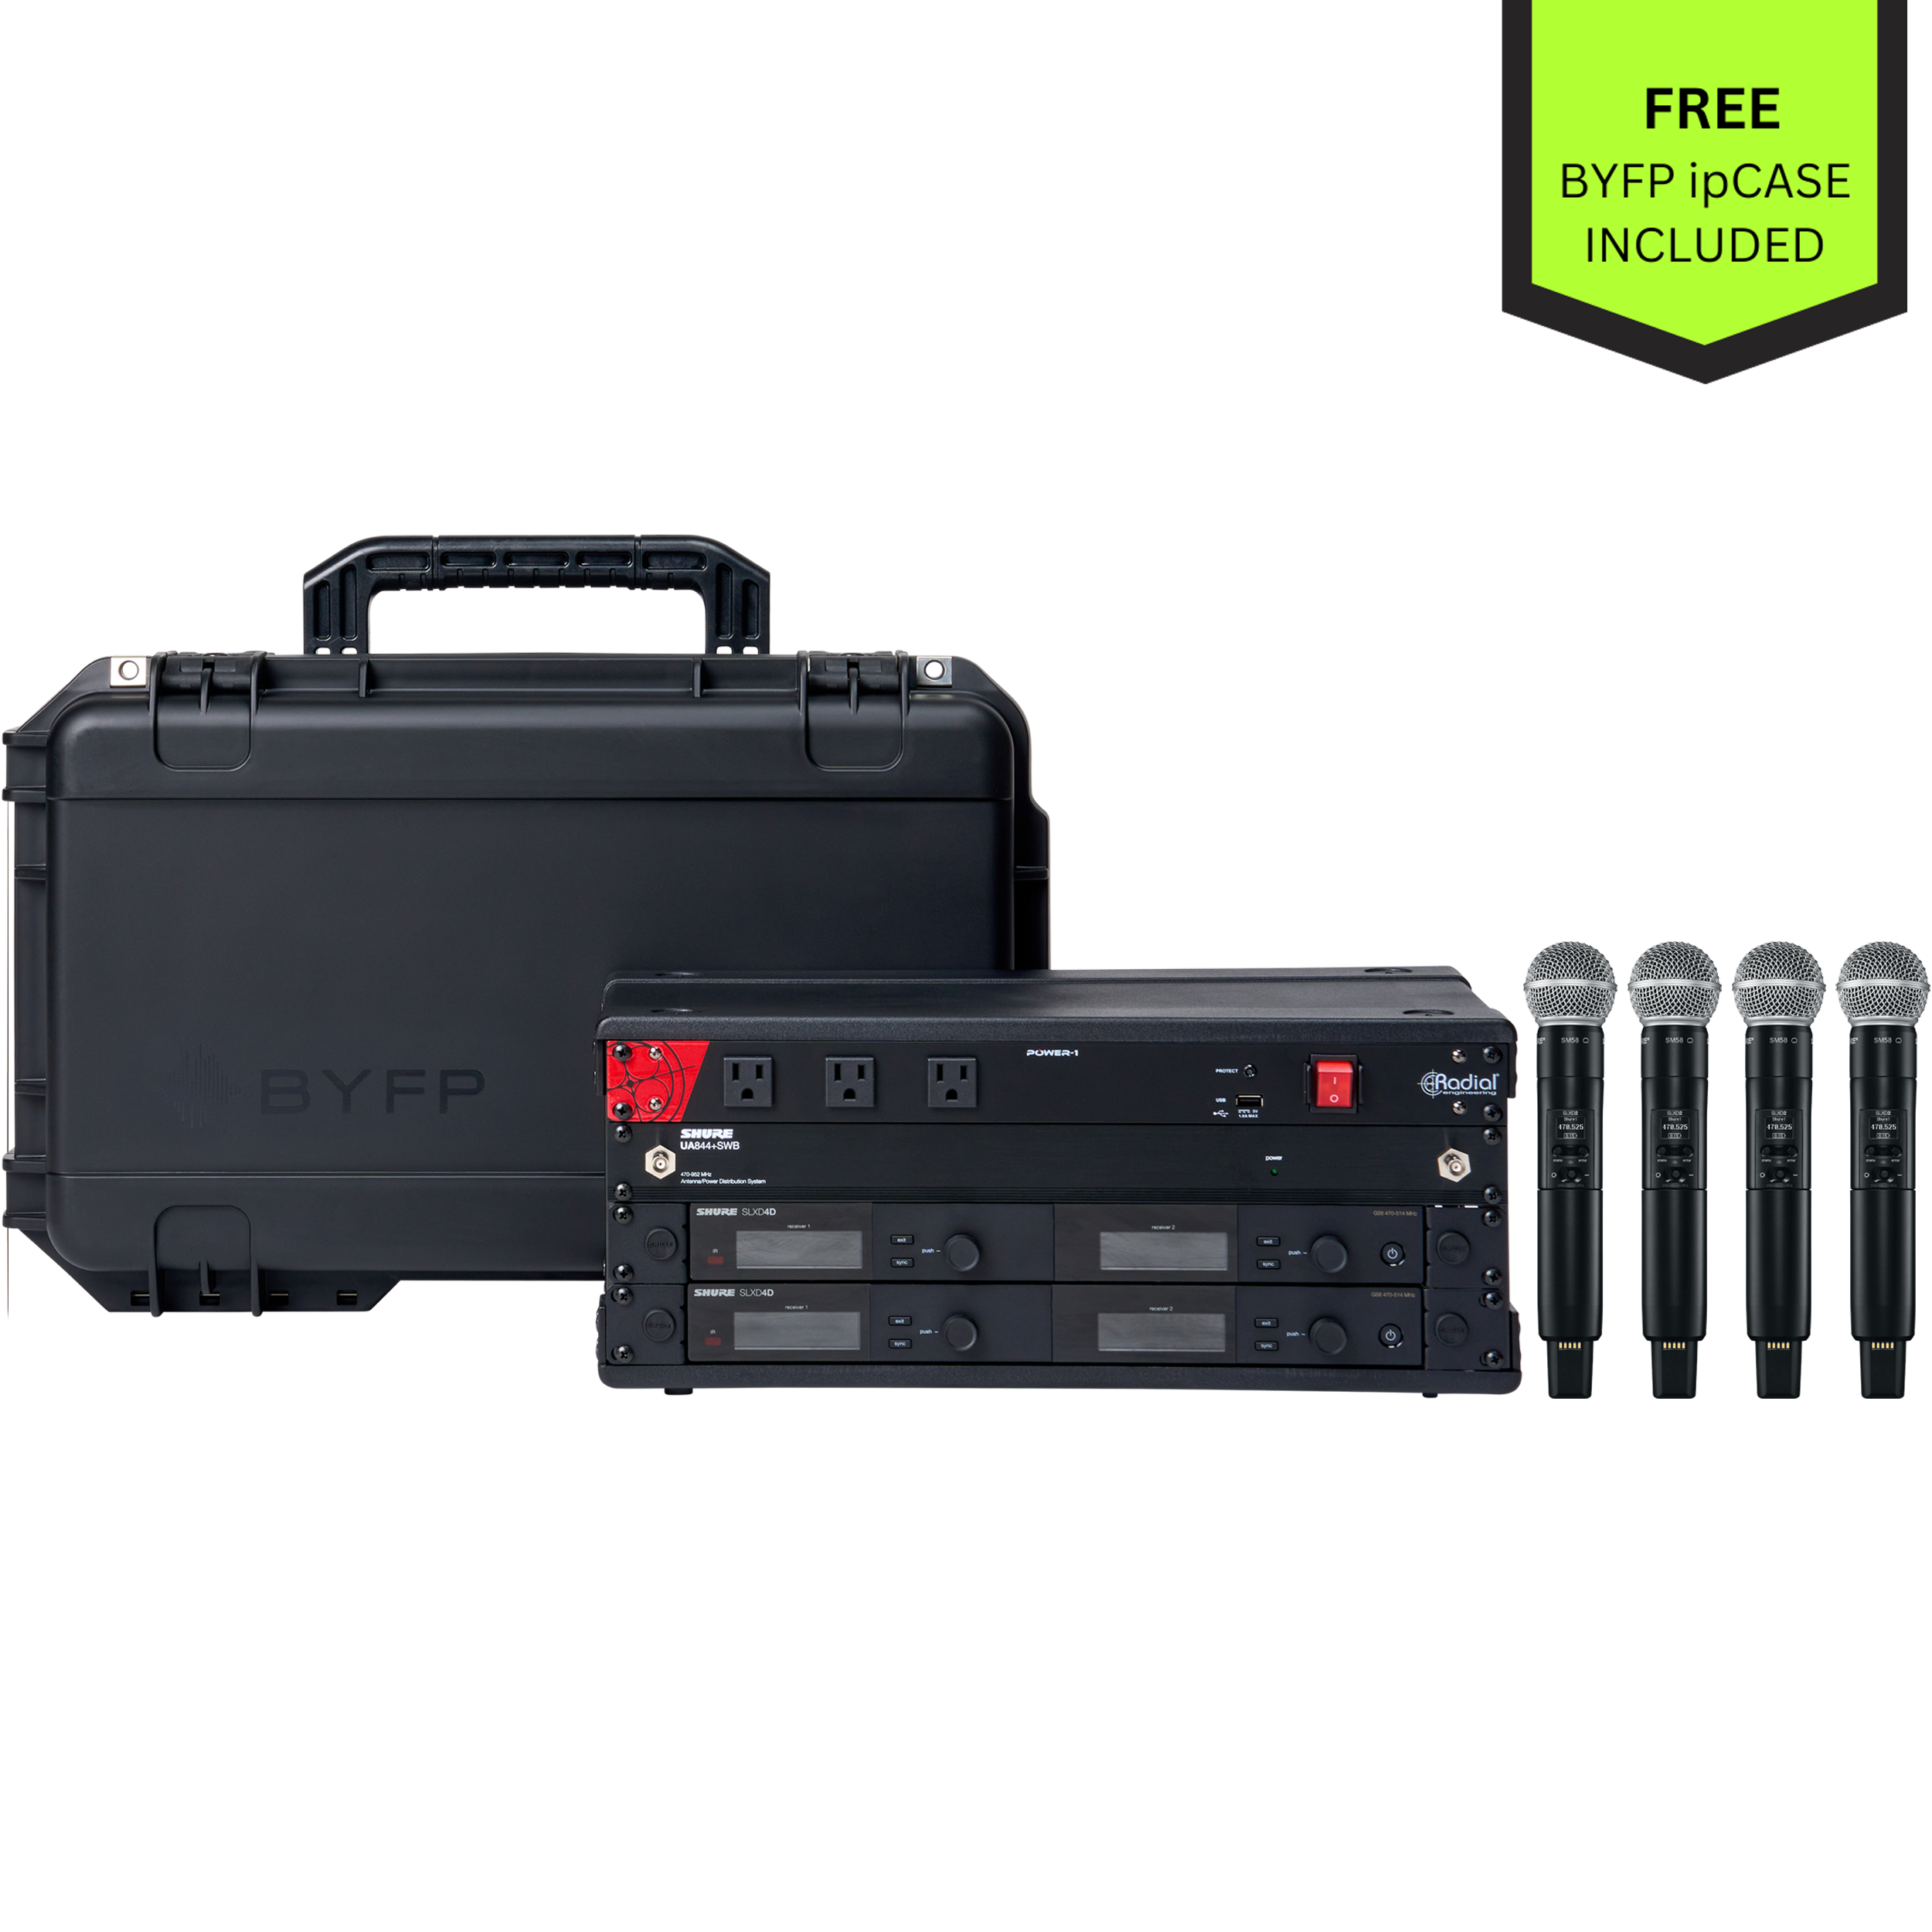 Shure SLX-D Quad Channel Wireless Microphone System with SM58 Handheld Transmitters and BYFP ipCase